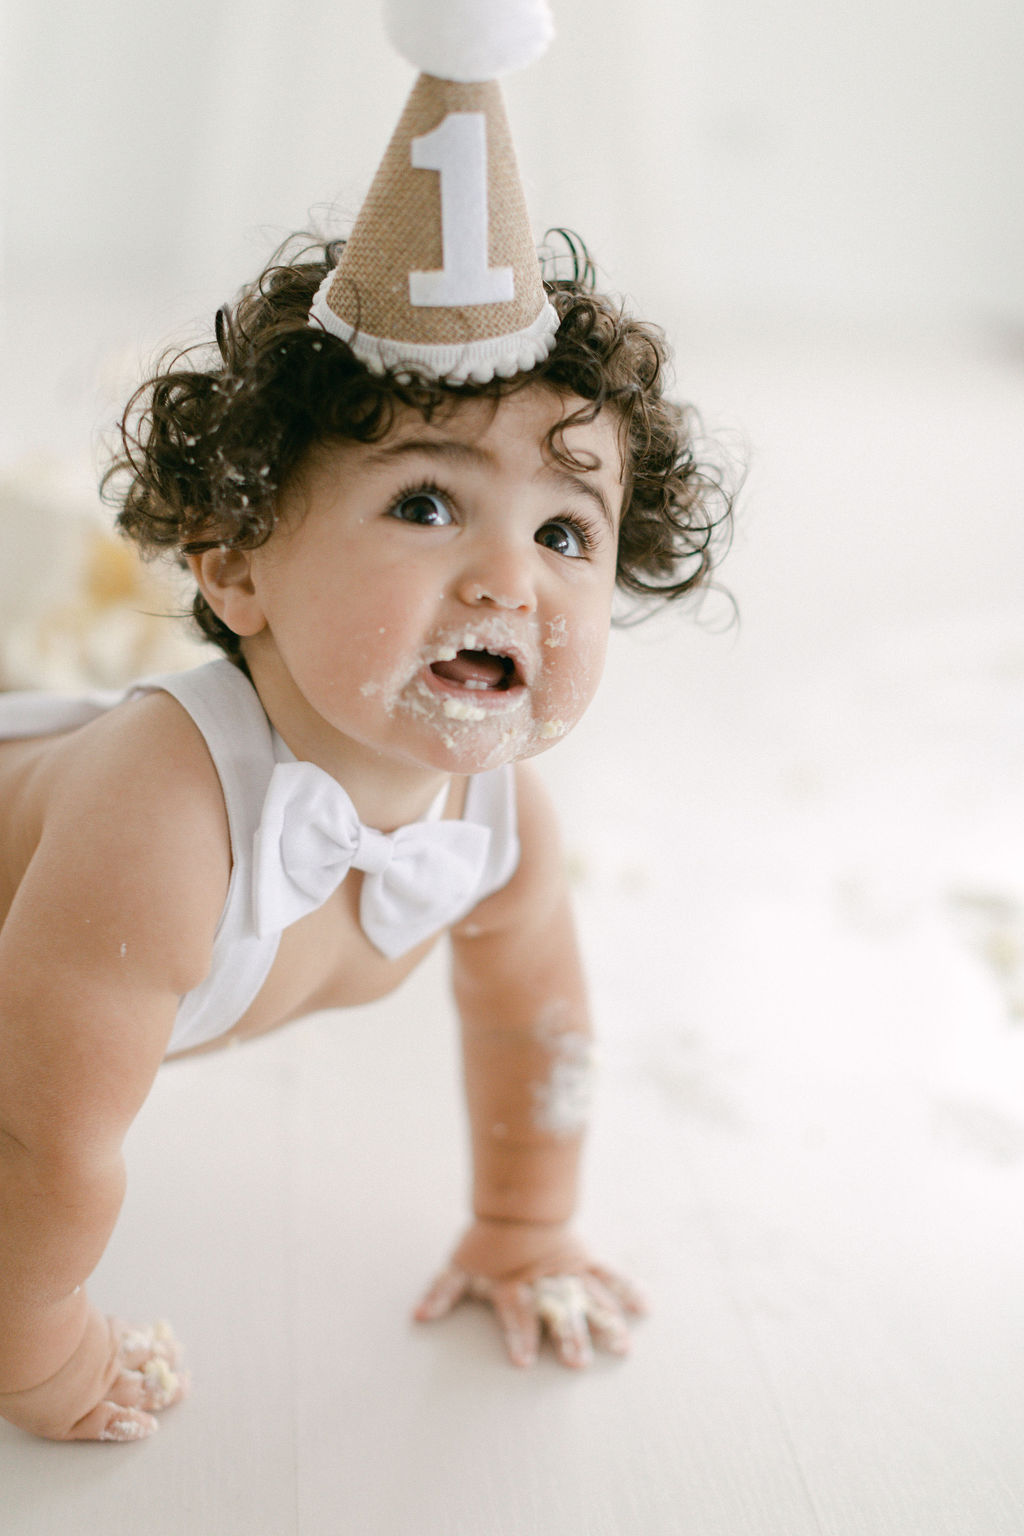 happy baby during cake smash and cone hat